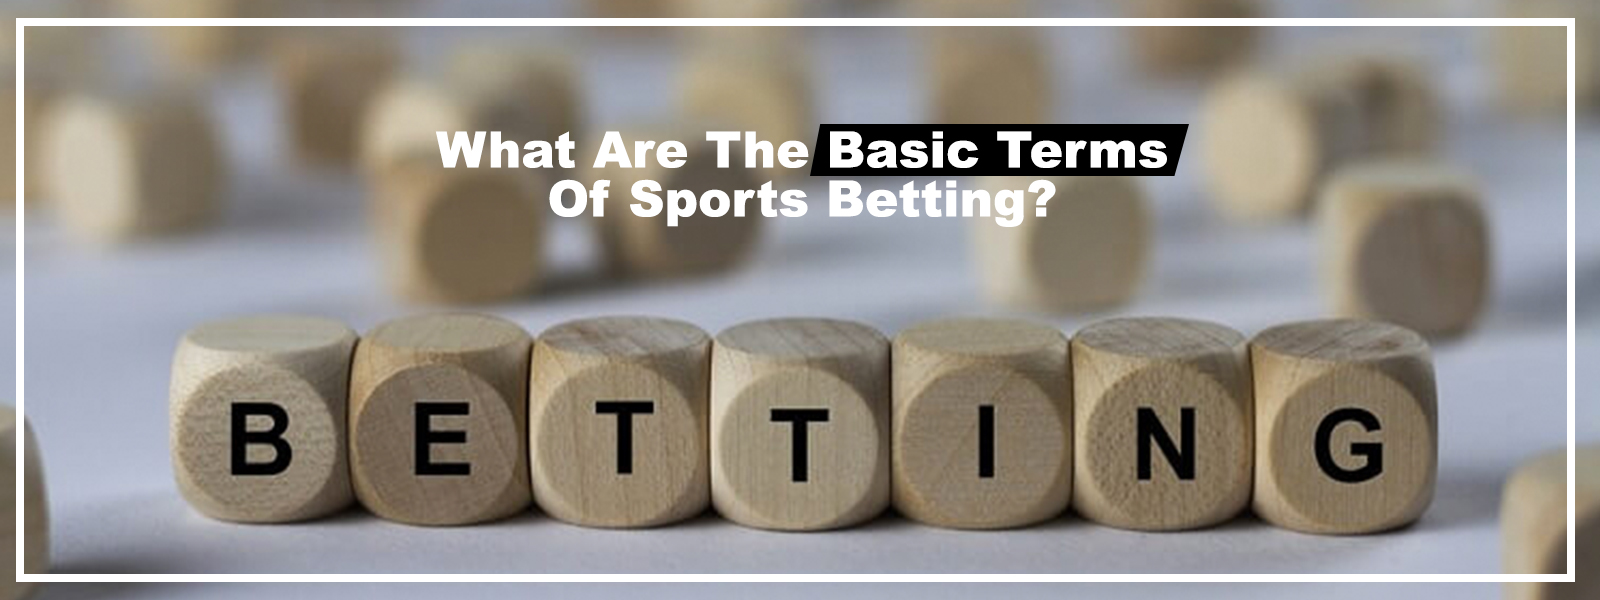 What Are The Basic Terms Of Sports Betting?